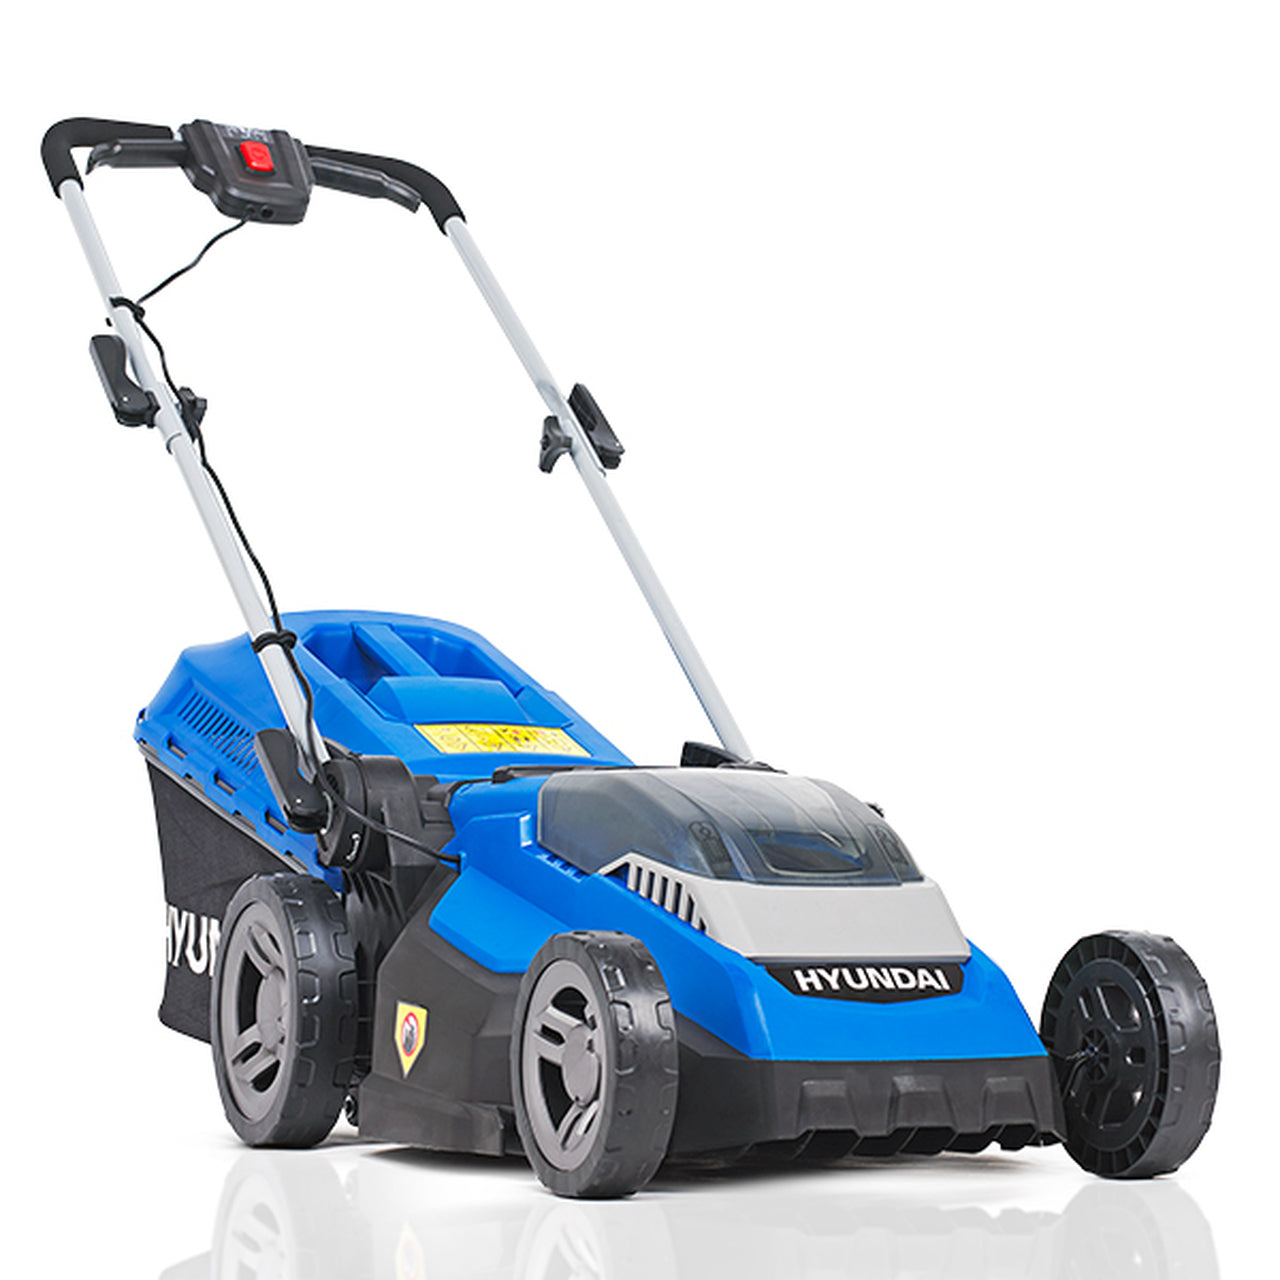 Hyundai-HYM40LI380P-38cm-Cordless-40v-Lithium-Ion-Battery-Roller-Lawnmower-with-Battery-and-Charger